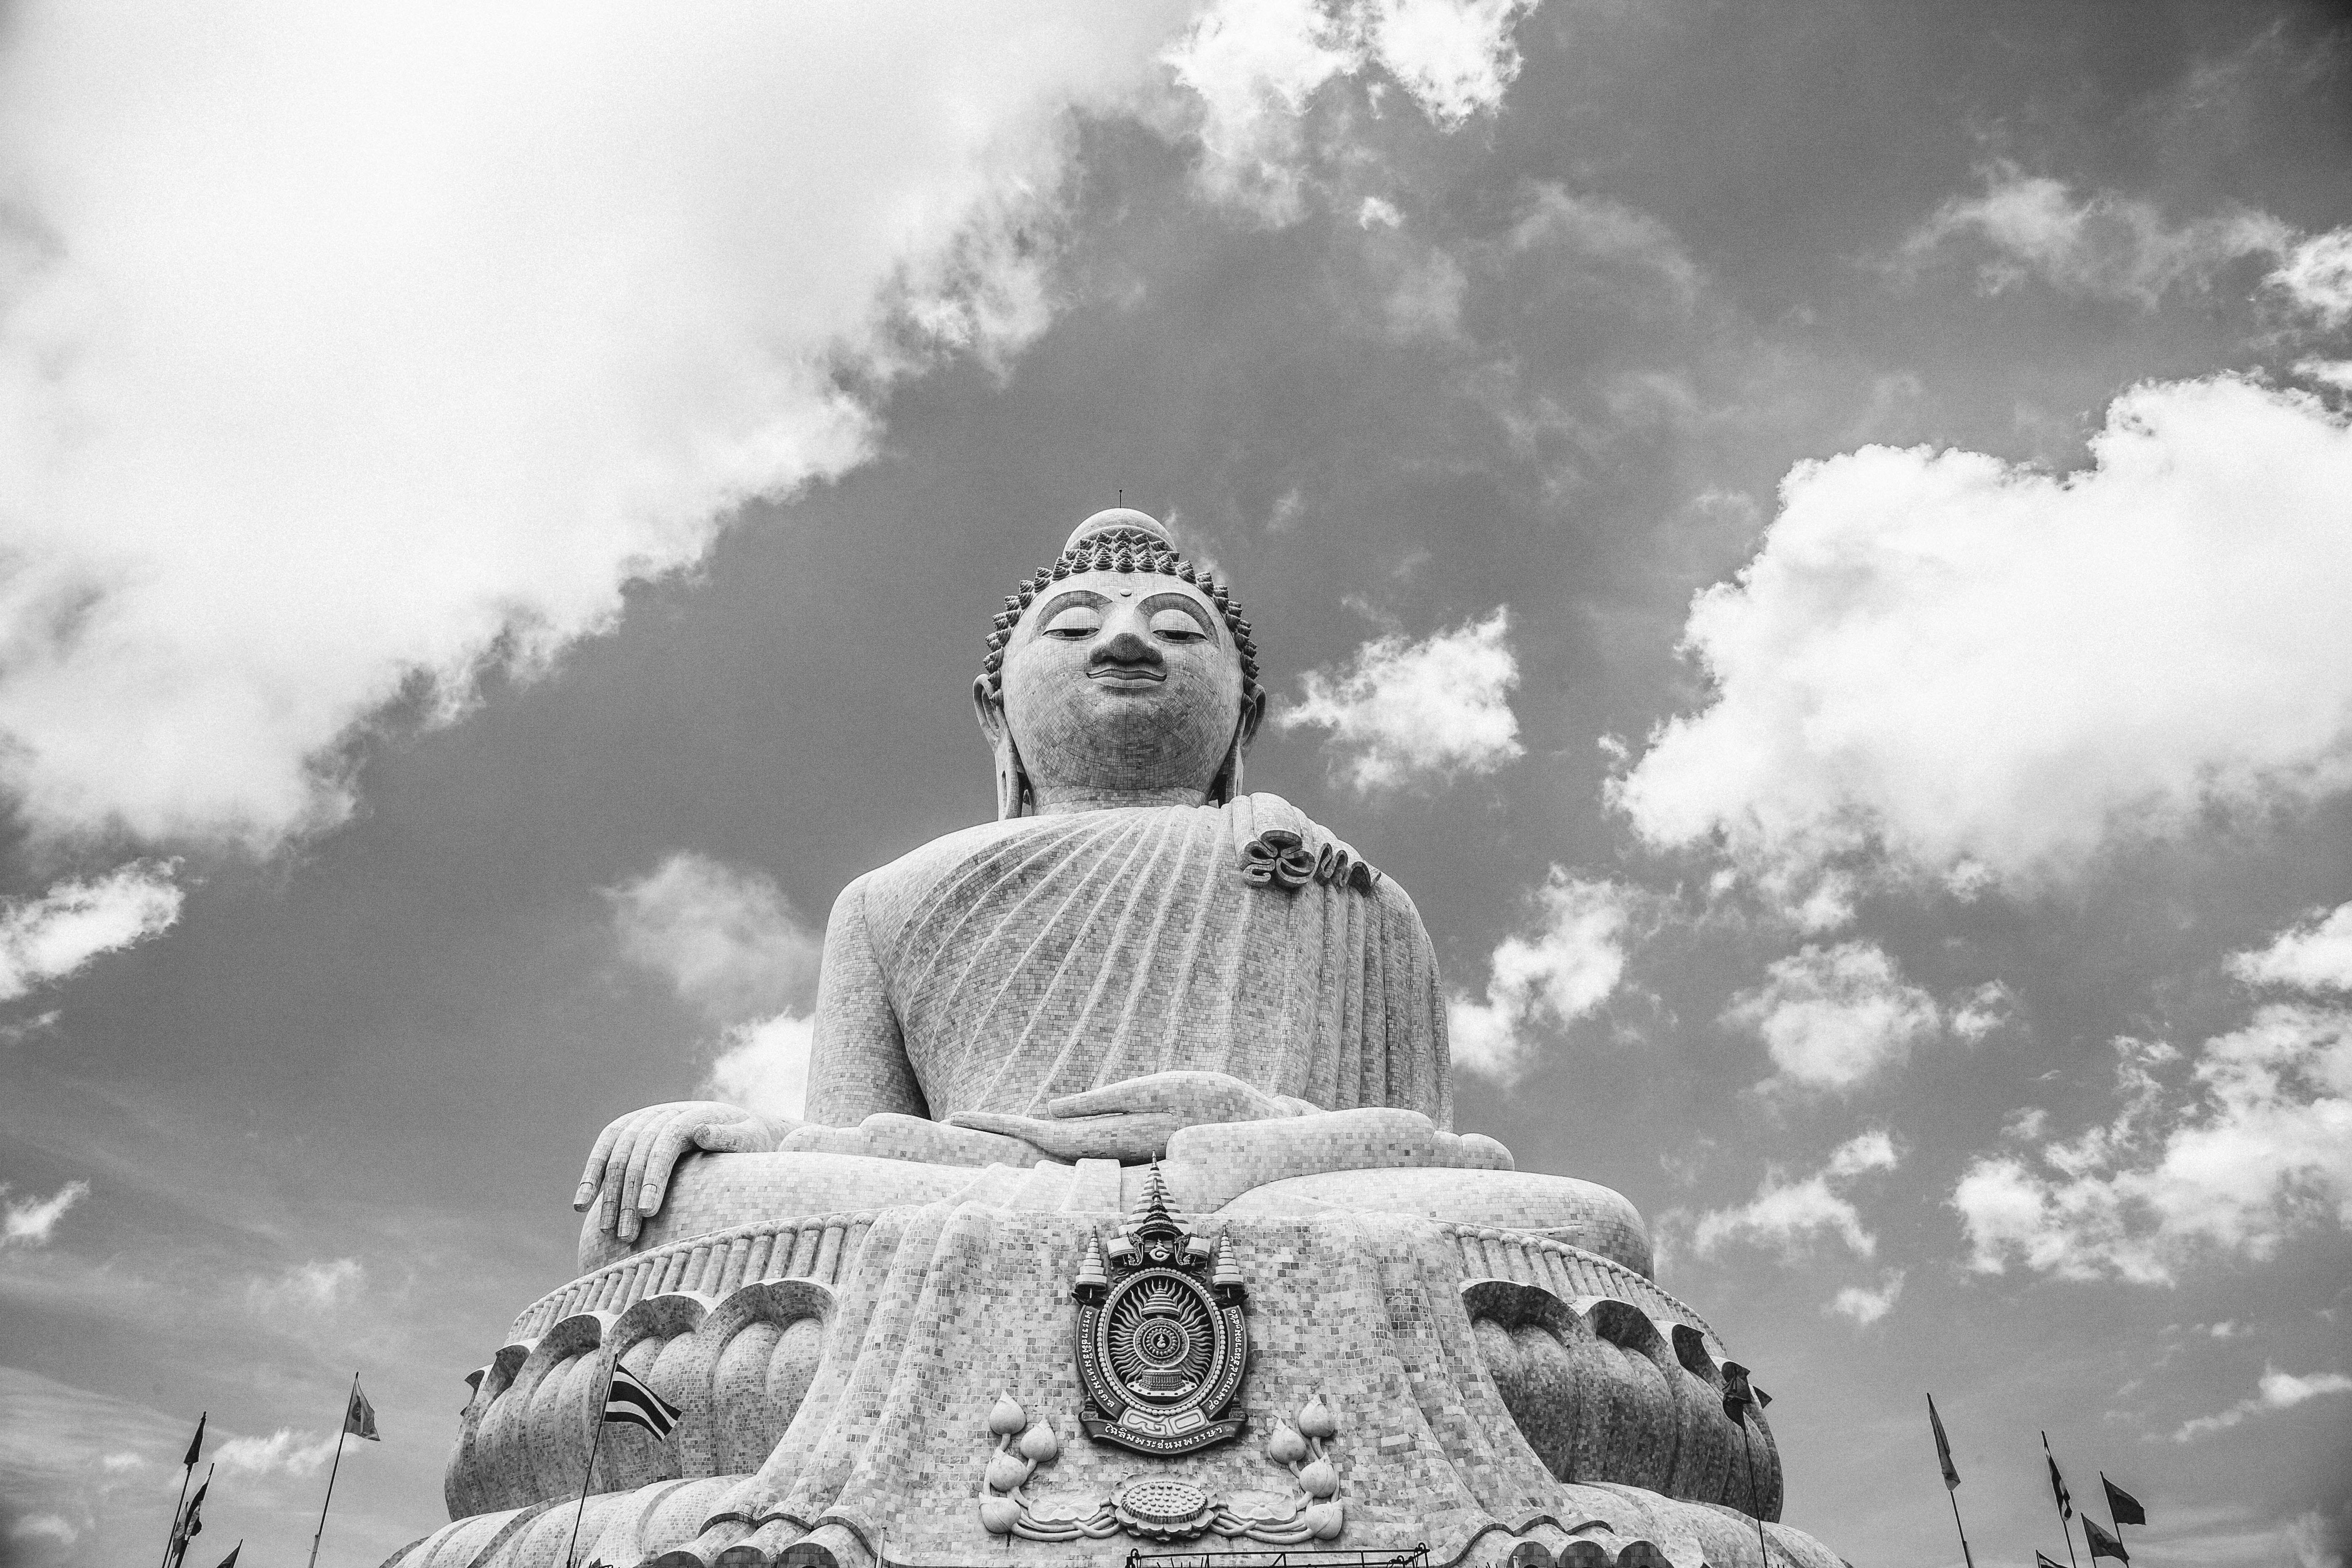 Statue, White, Black, Monument, low angle view, cloud - sky